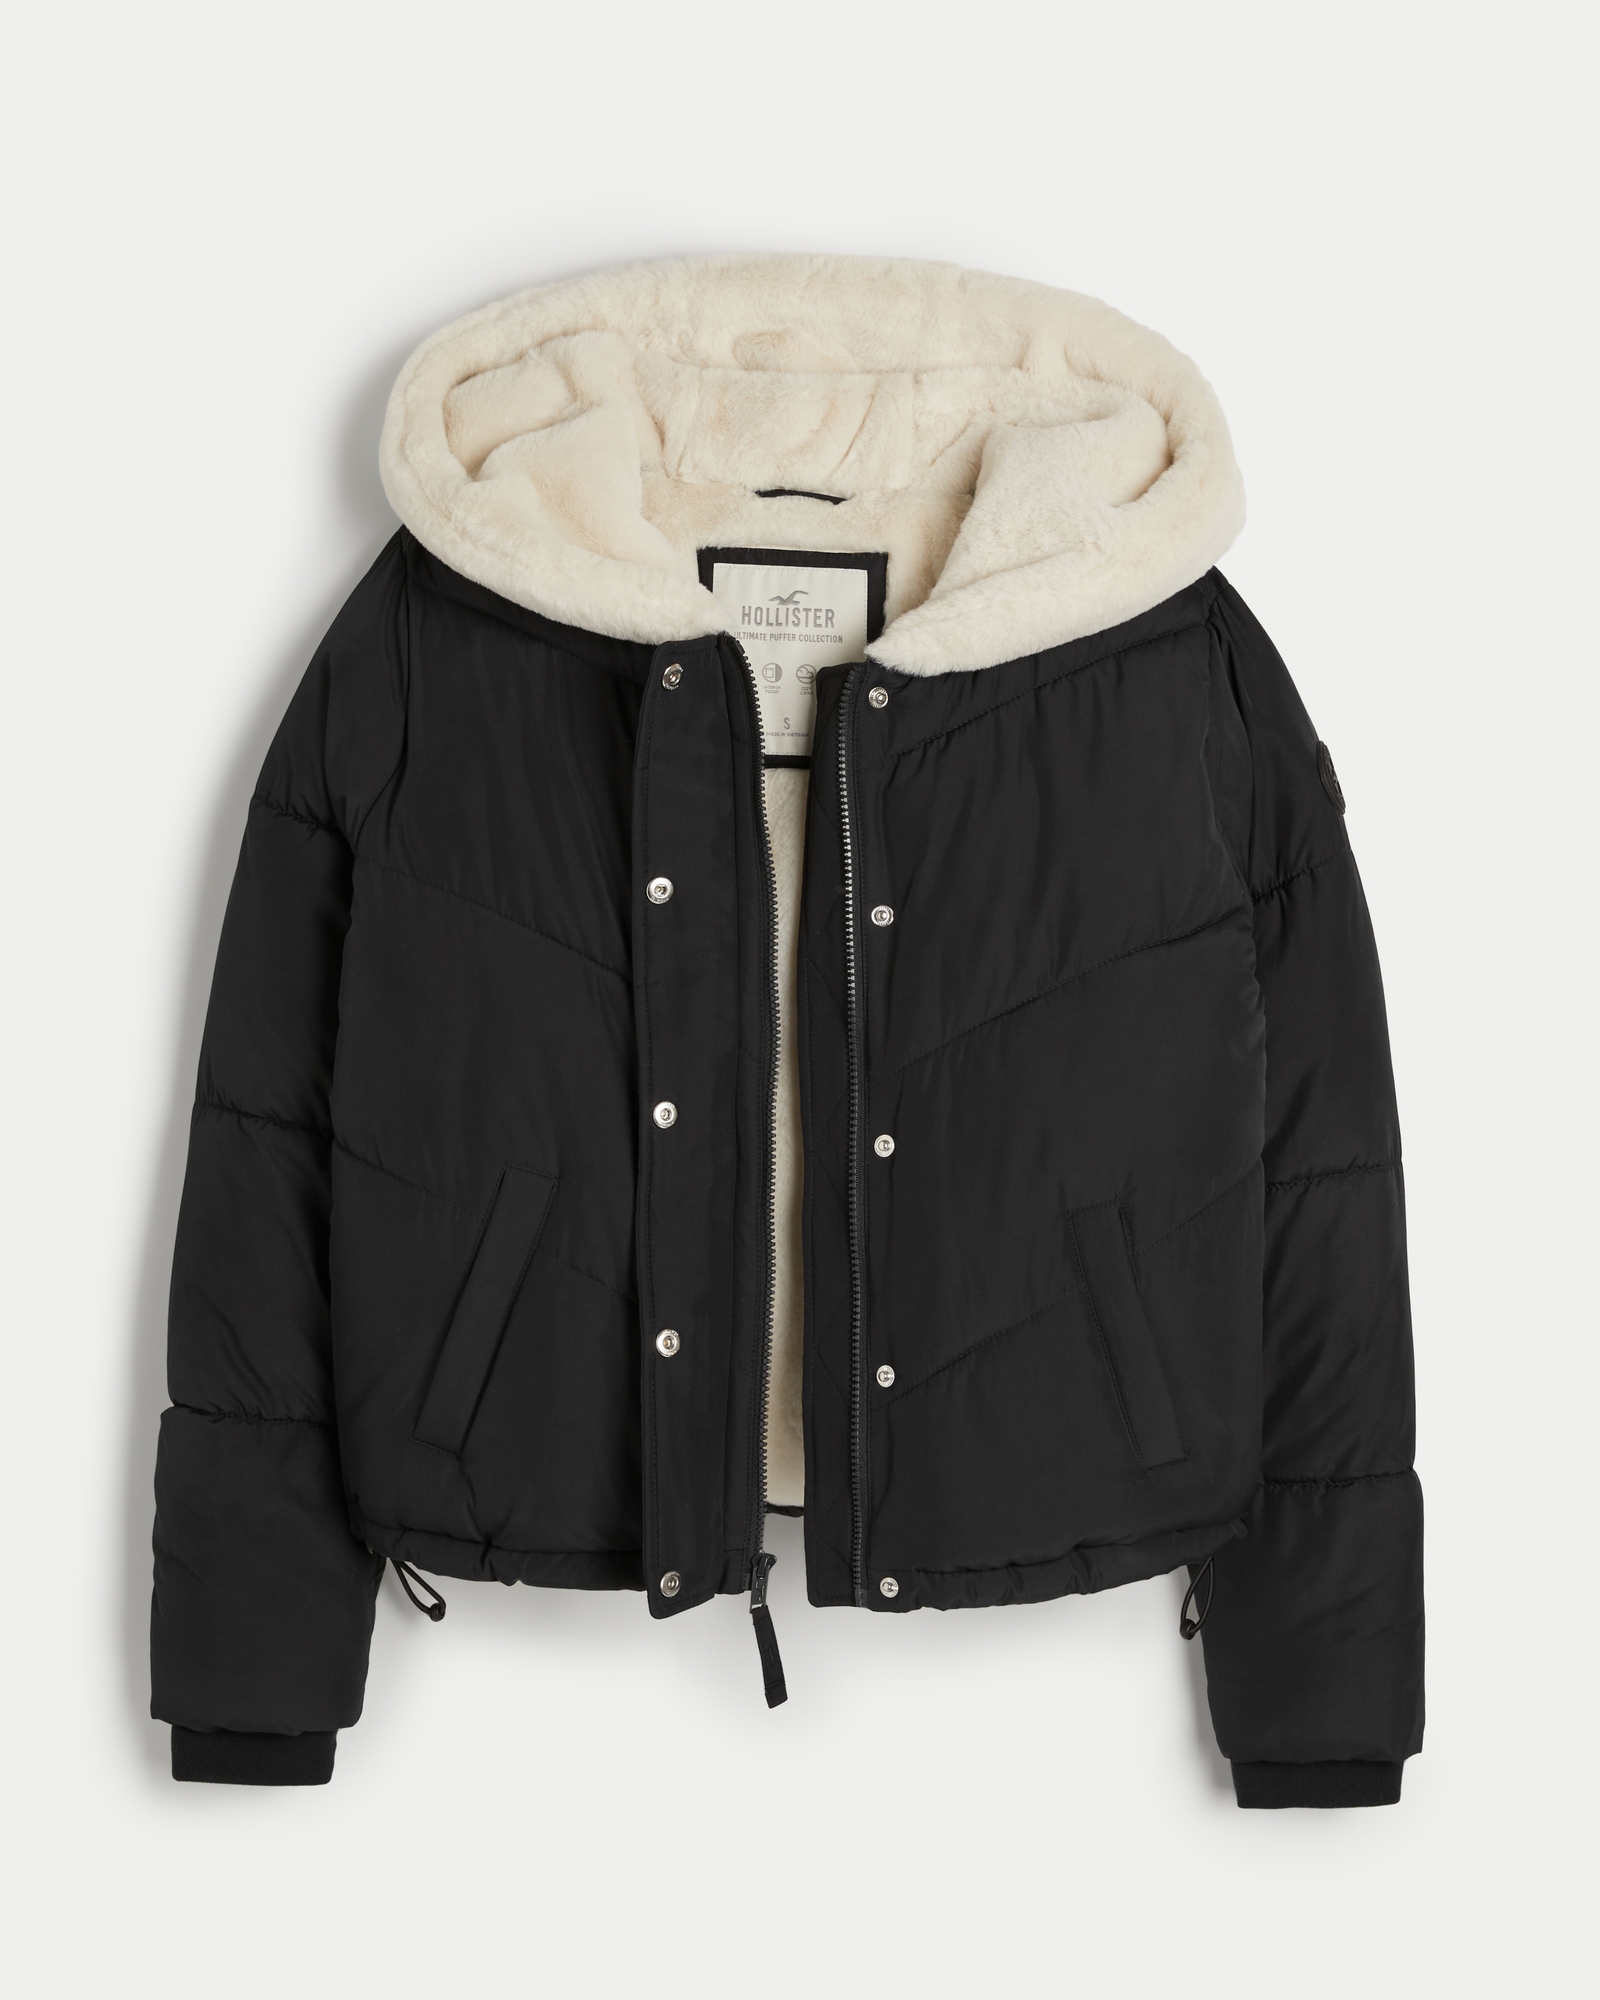 Girls White Down Coat Jacket With Fur Lined Hood, Hollister Surf